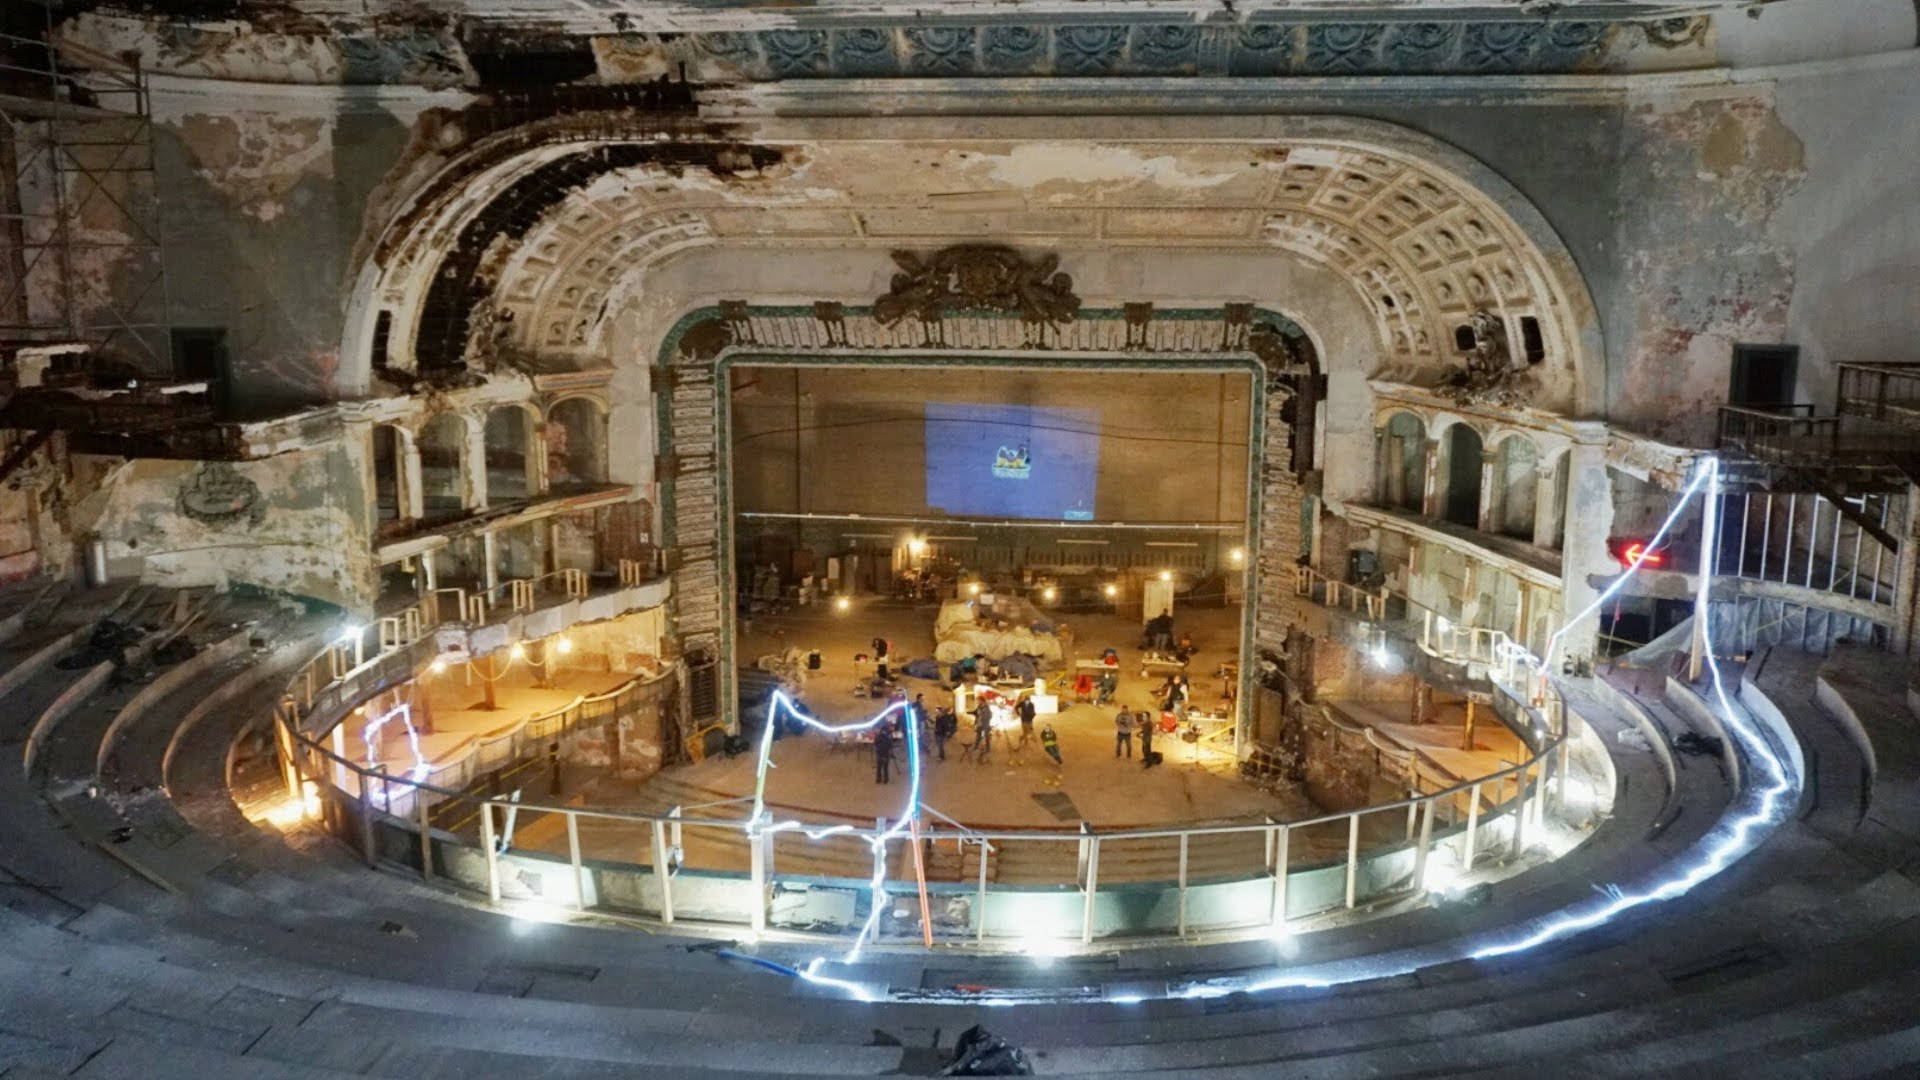 FPV drone racing in an abandoned opera house